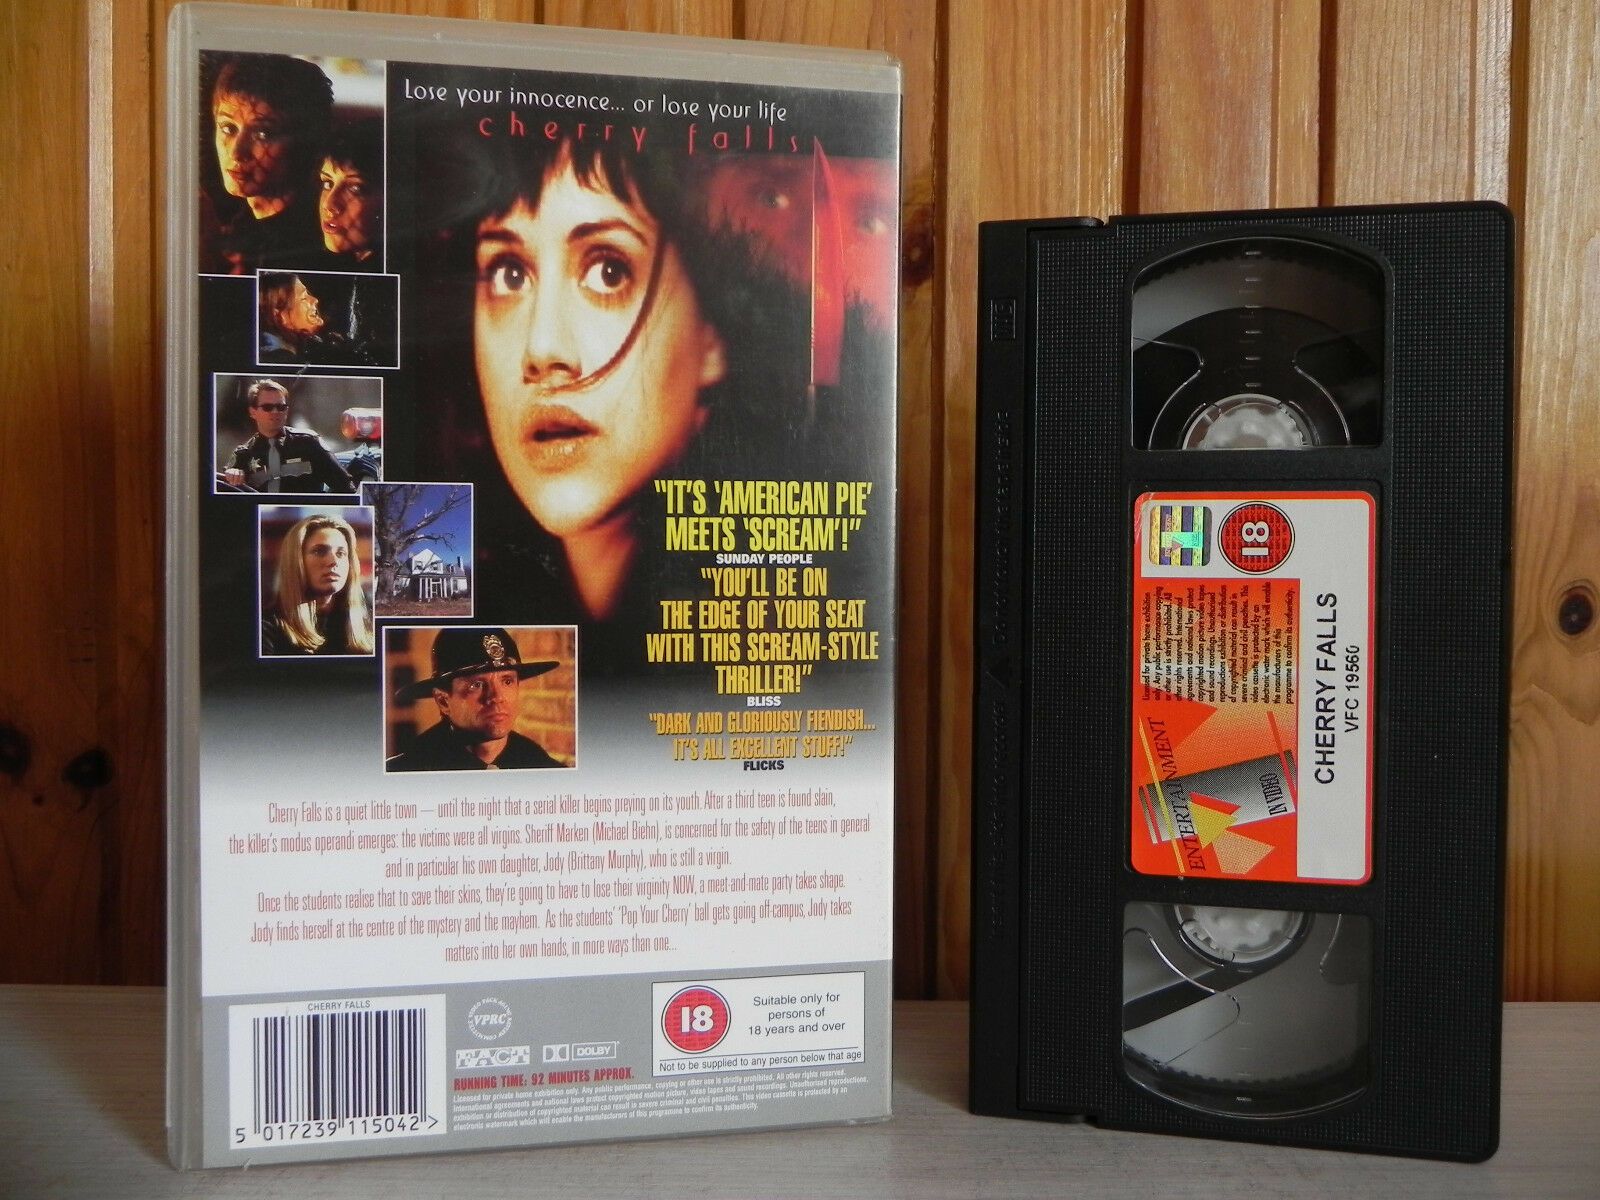 Cherry Falls - Entertainment - Thriller - Brittany Murphy - Large Box - Pal VHS-